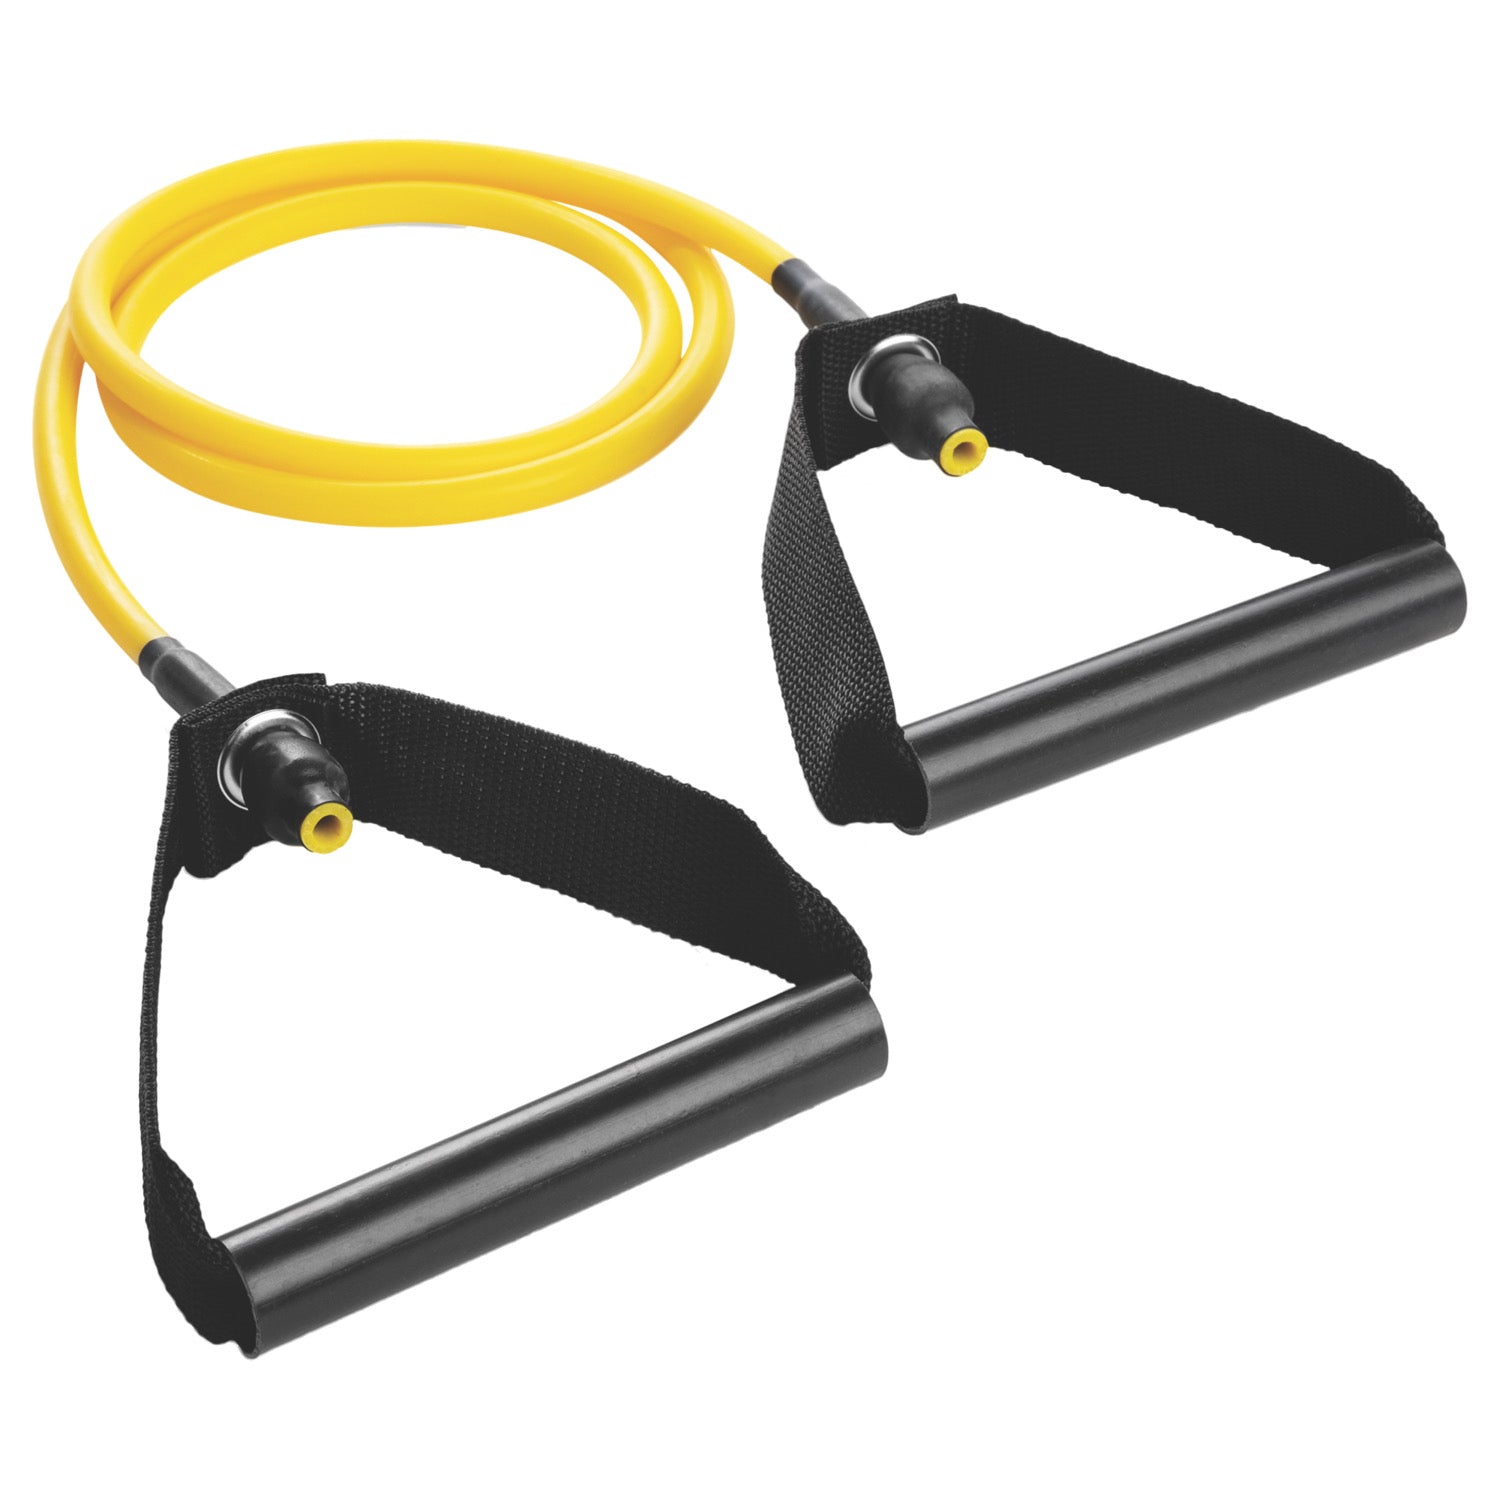 XP Resistance Tubing with PVC Handles Series Extra-Light / Yellow RHINO Fitness __label:NEW! fitness physical therapy resistance Training tubing